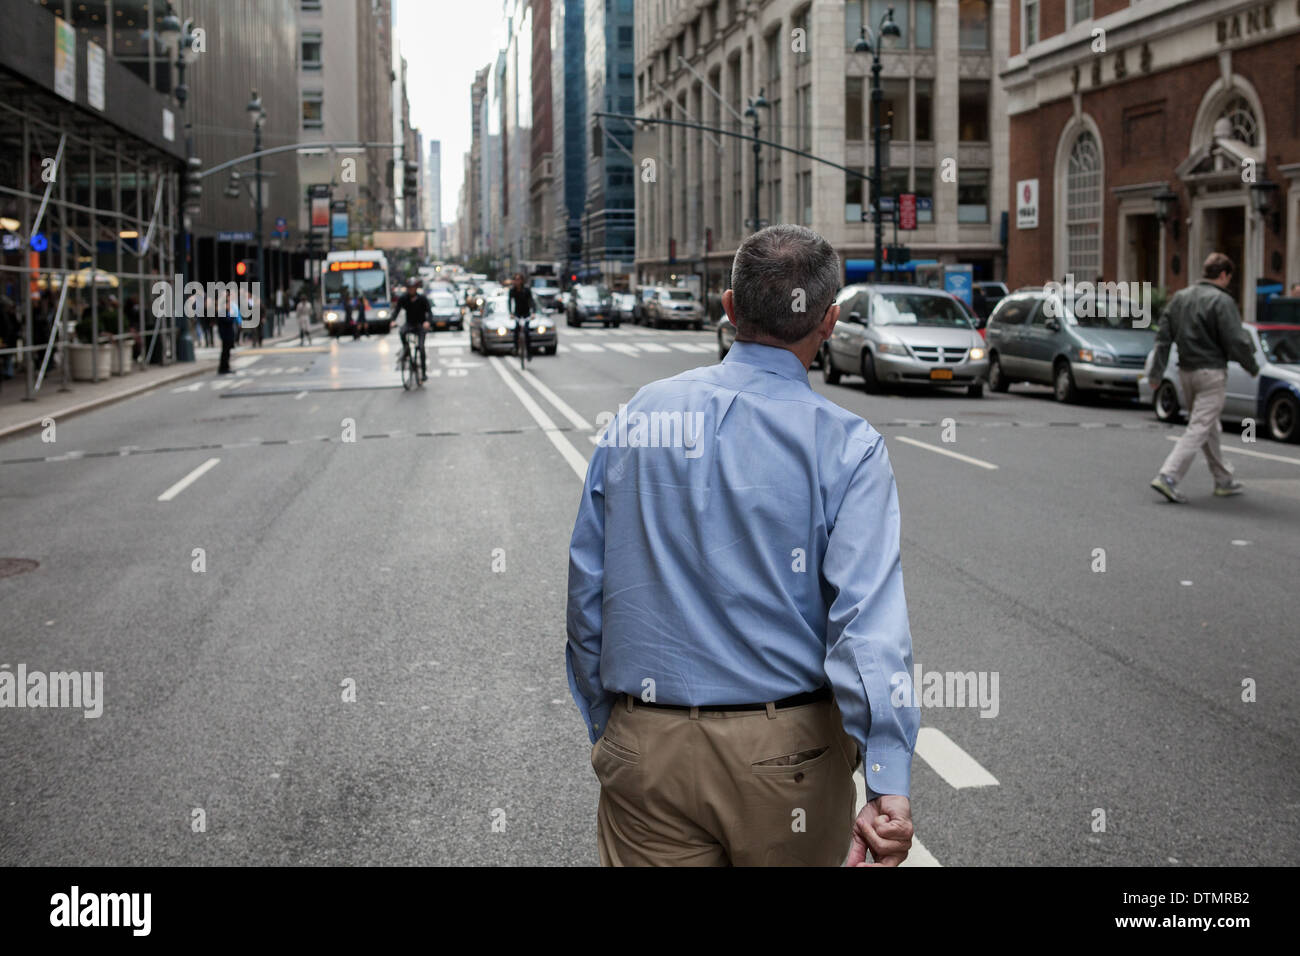 Businessman in blue shirt crossing an intersection. Stock Photo